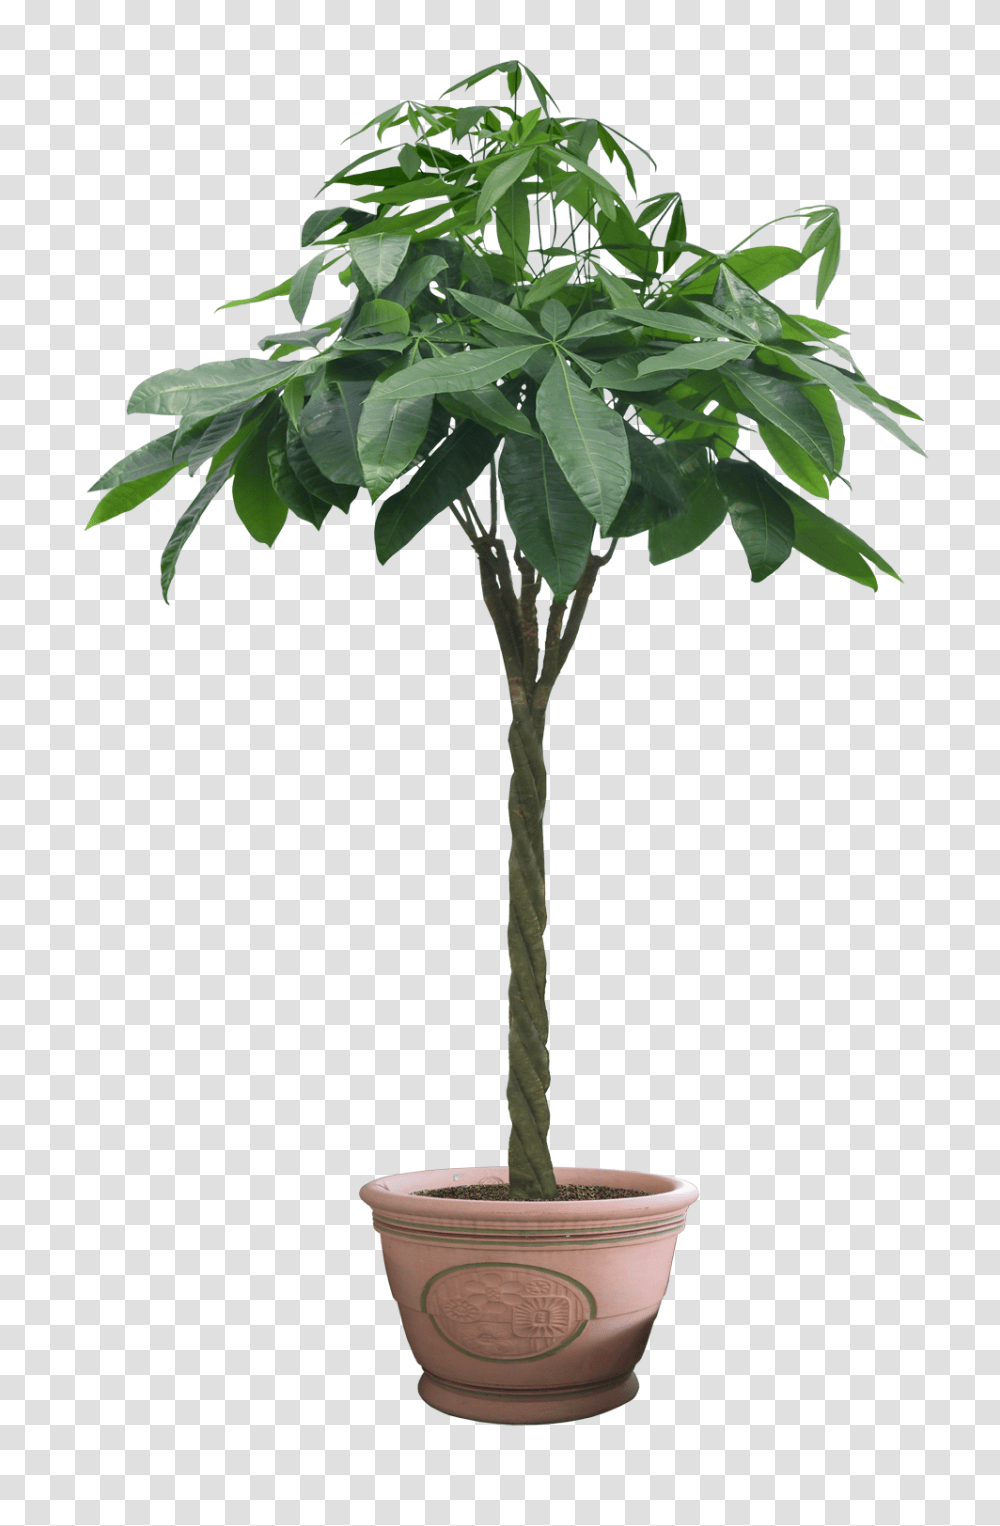 Plant Potted Flower Image Potted Tree, Leaf, Palm Tree, Arecaceae Transparent Png